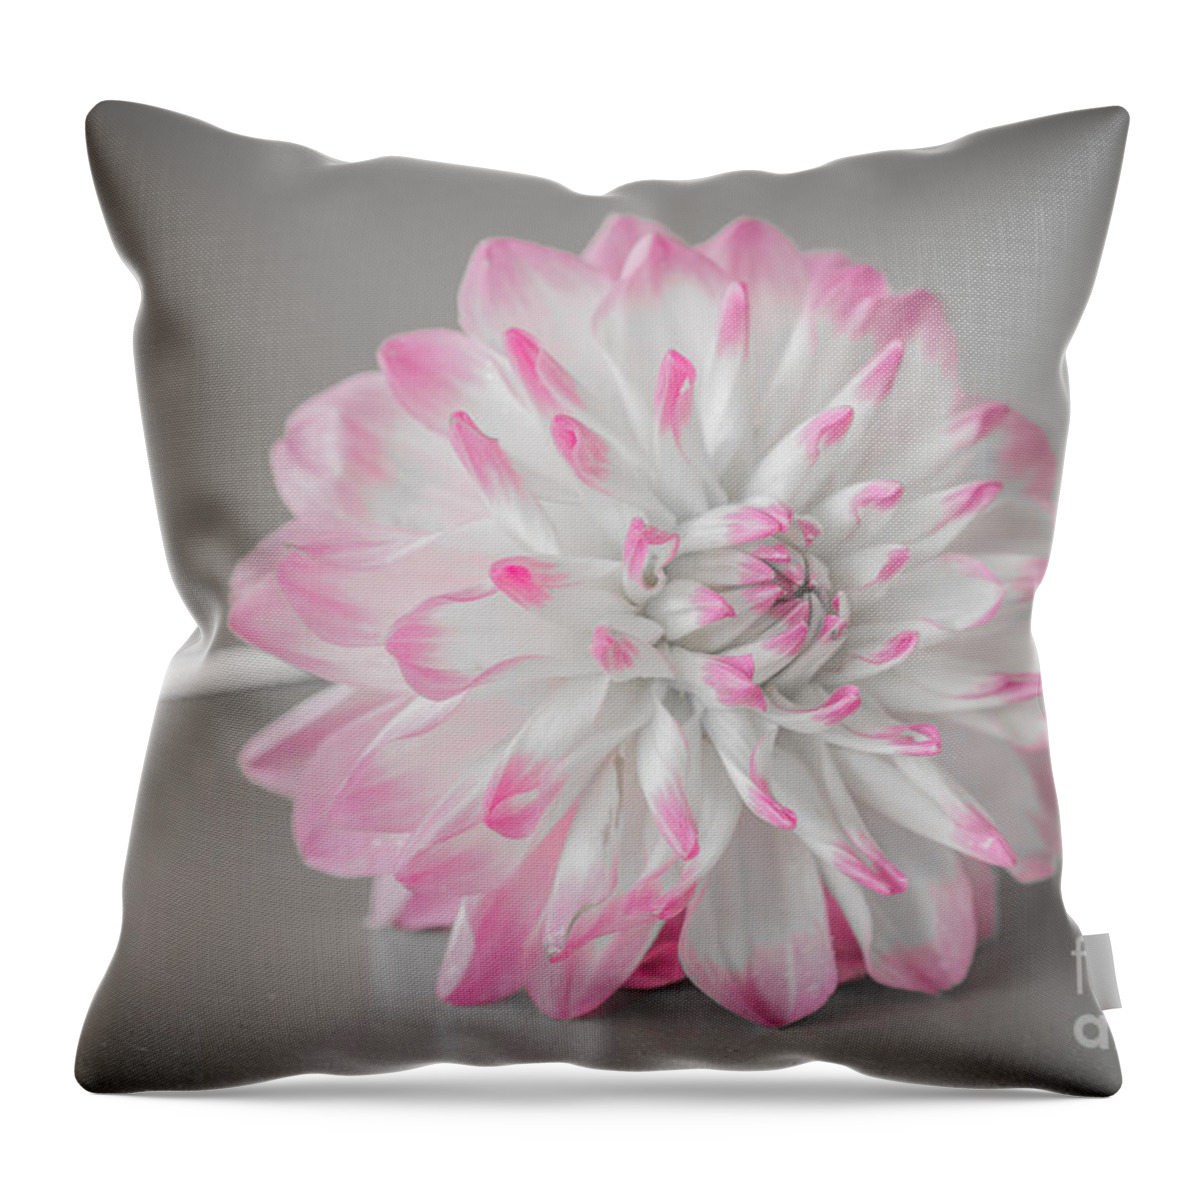 Flower Throw Pillow featuring the photograph Pink Dahlia by Amanda Mohler